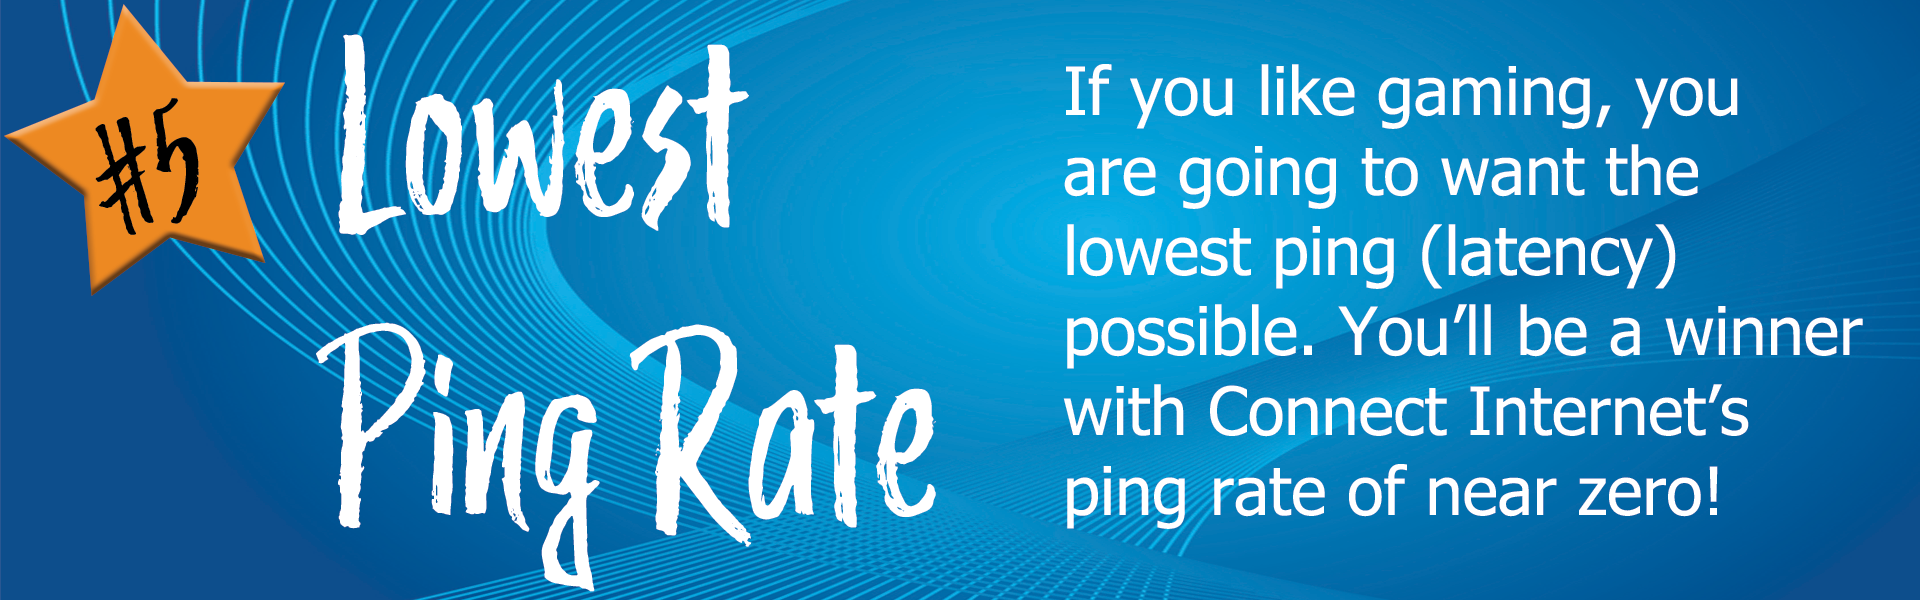 number five reason to connect is a low ping rate